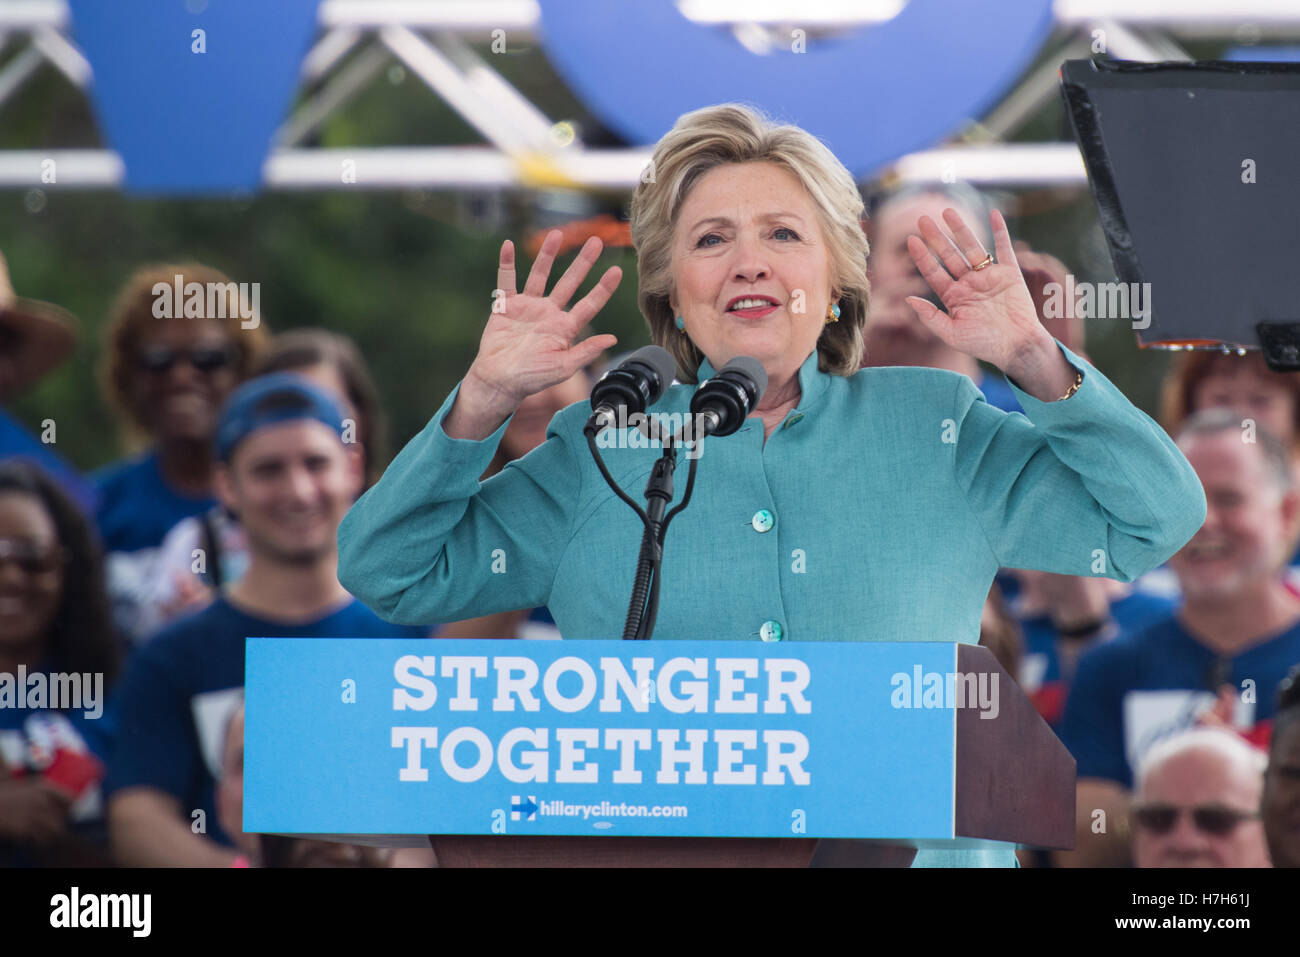 Hillary Clinton, former Secretary of State and Candidate for President of the US at a campaign rally 3 days before the election. Stock Photo